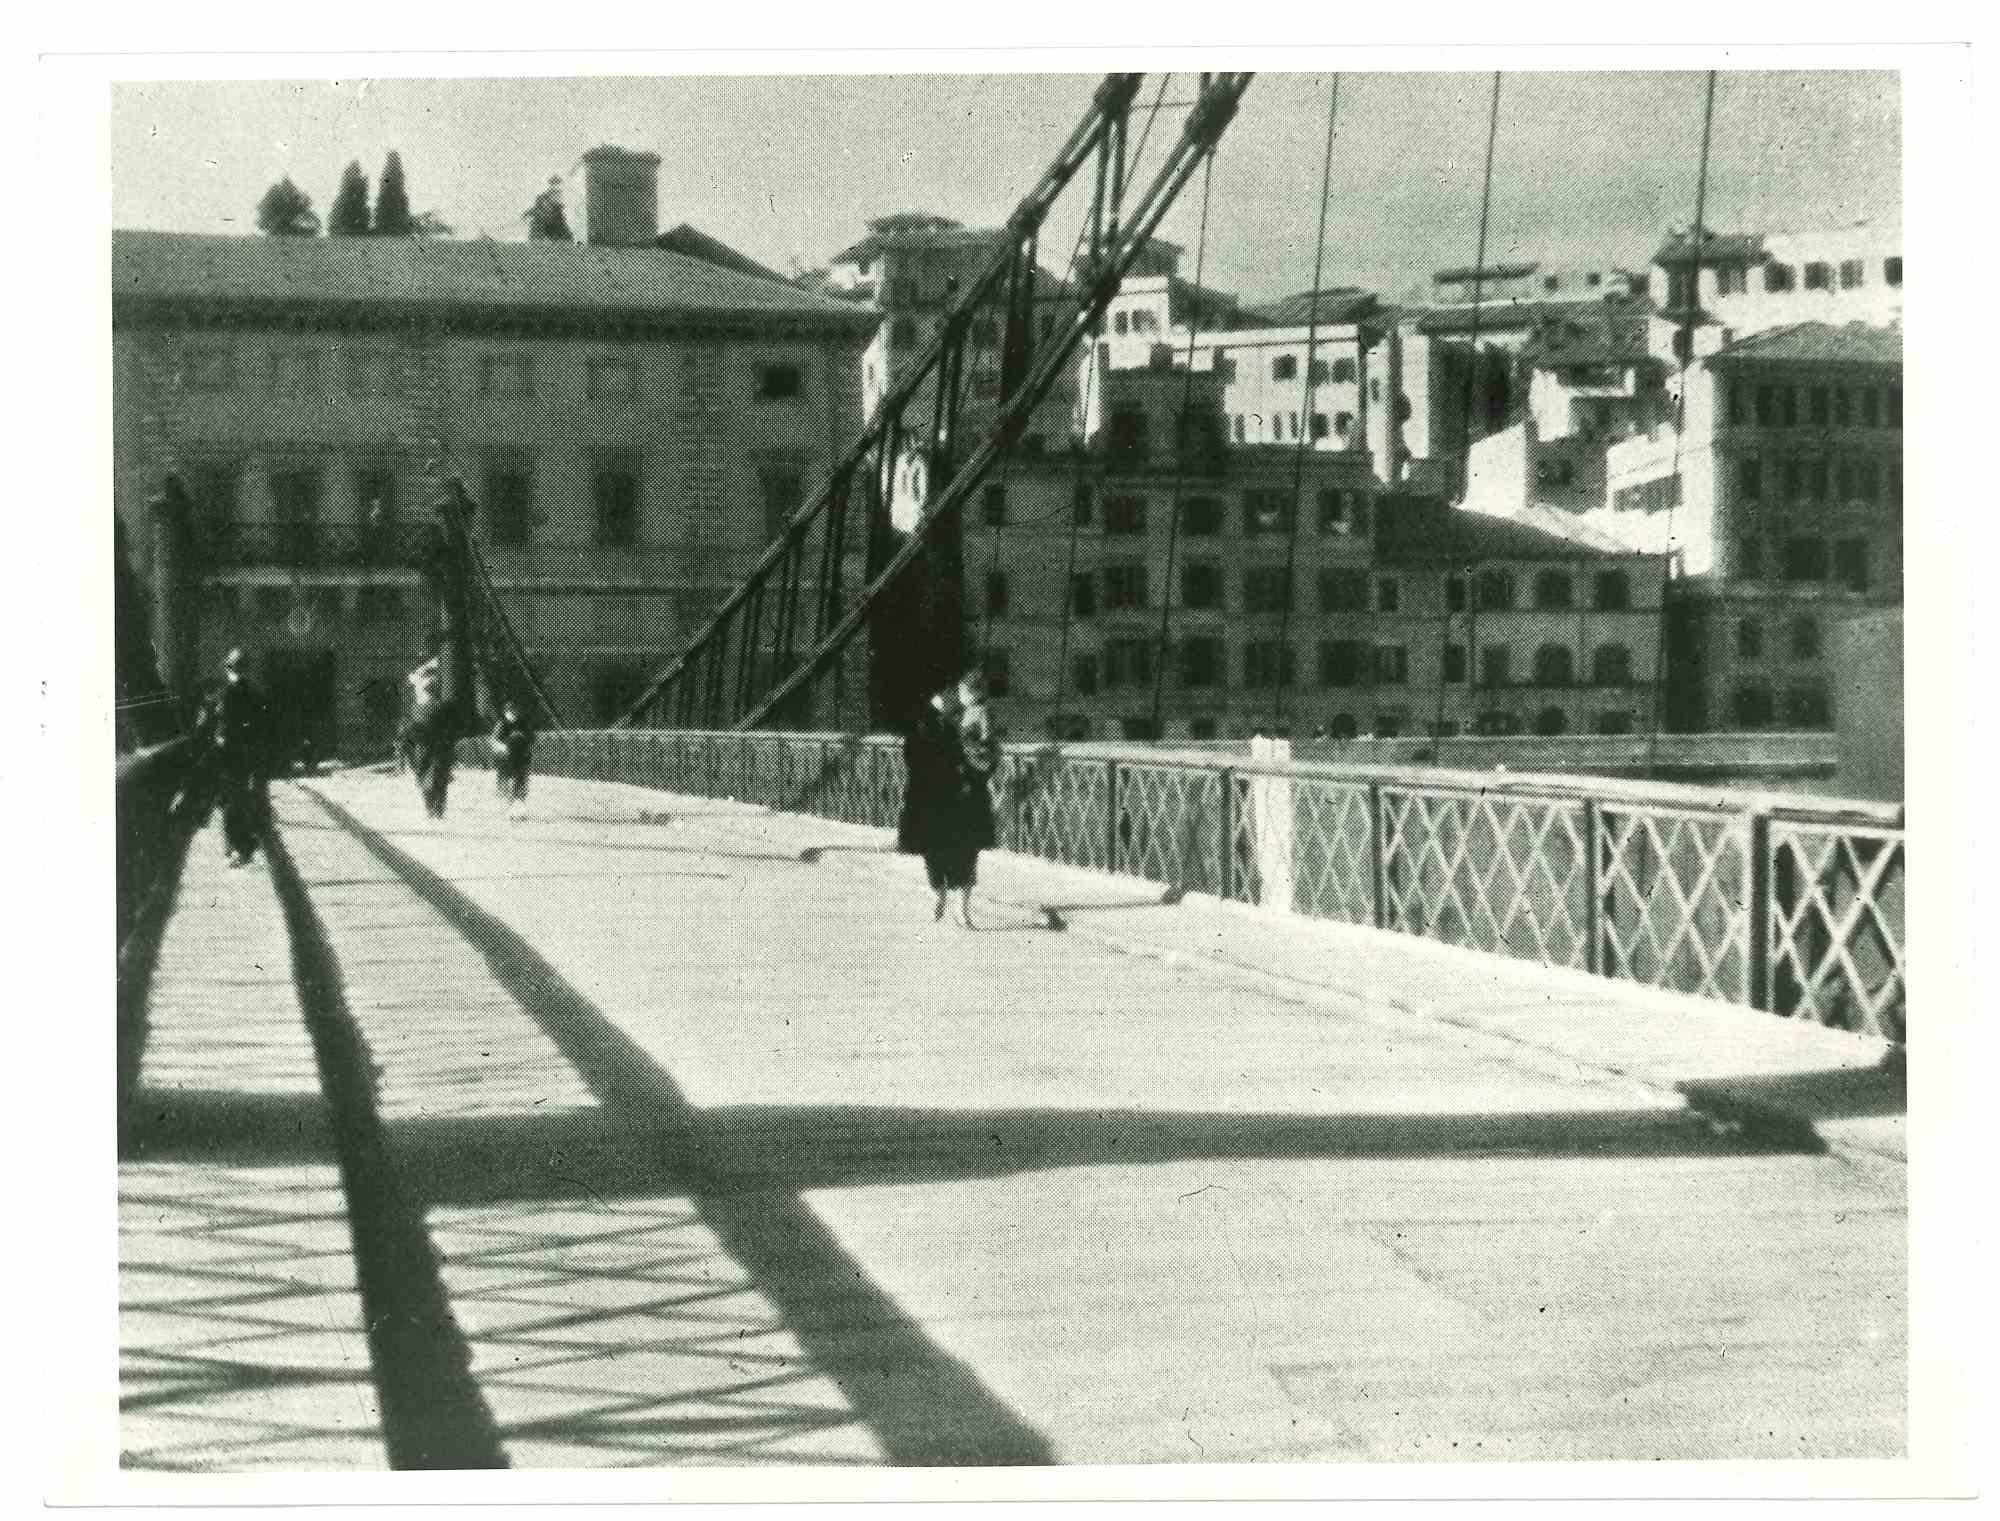 Unknown Landscape Photograph - The Bridge in Rome - Vintage Photograph - Early 20th Century